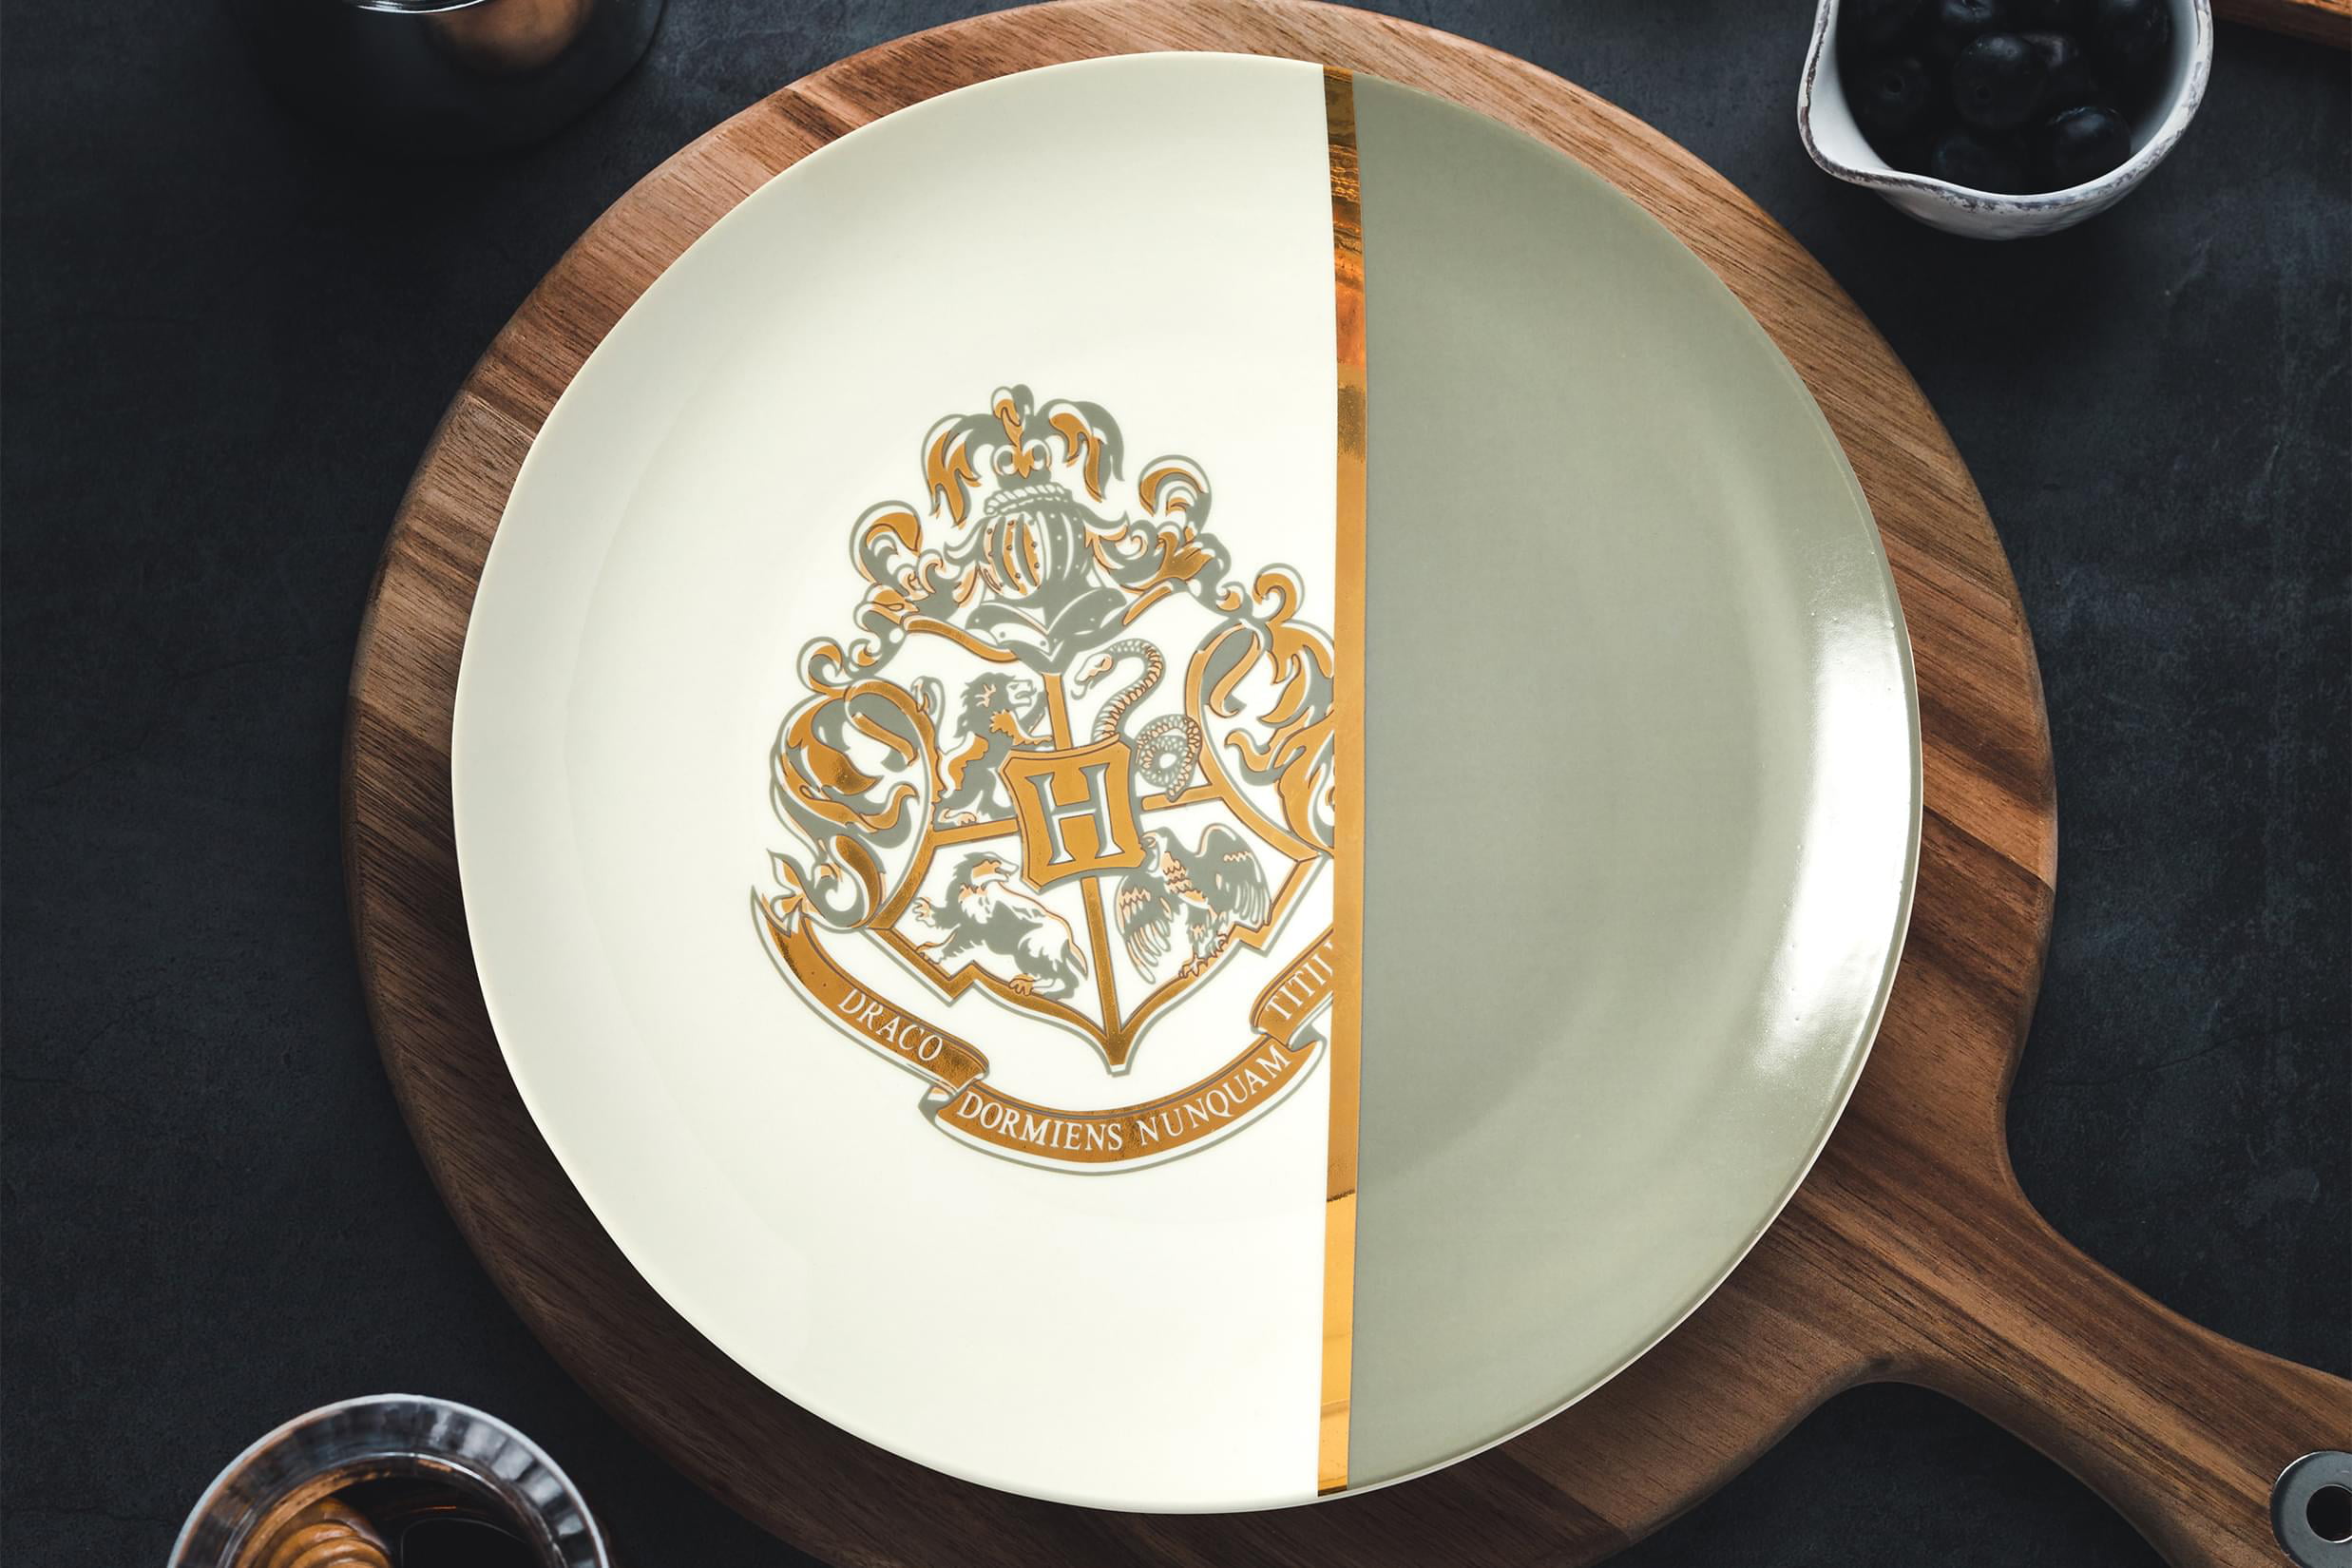 White & Grey Design Features School of Witchcraft & Wizardry Motto & Banner Harry Potter Hogwarts Gold Crest 4-Piece Ceramic Plate Set 10.25 Large Round Dinnerware Fun Porcelain Dishware Gift 